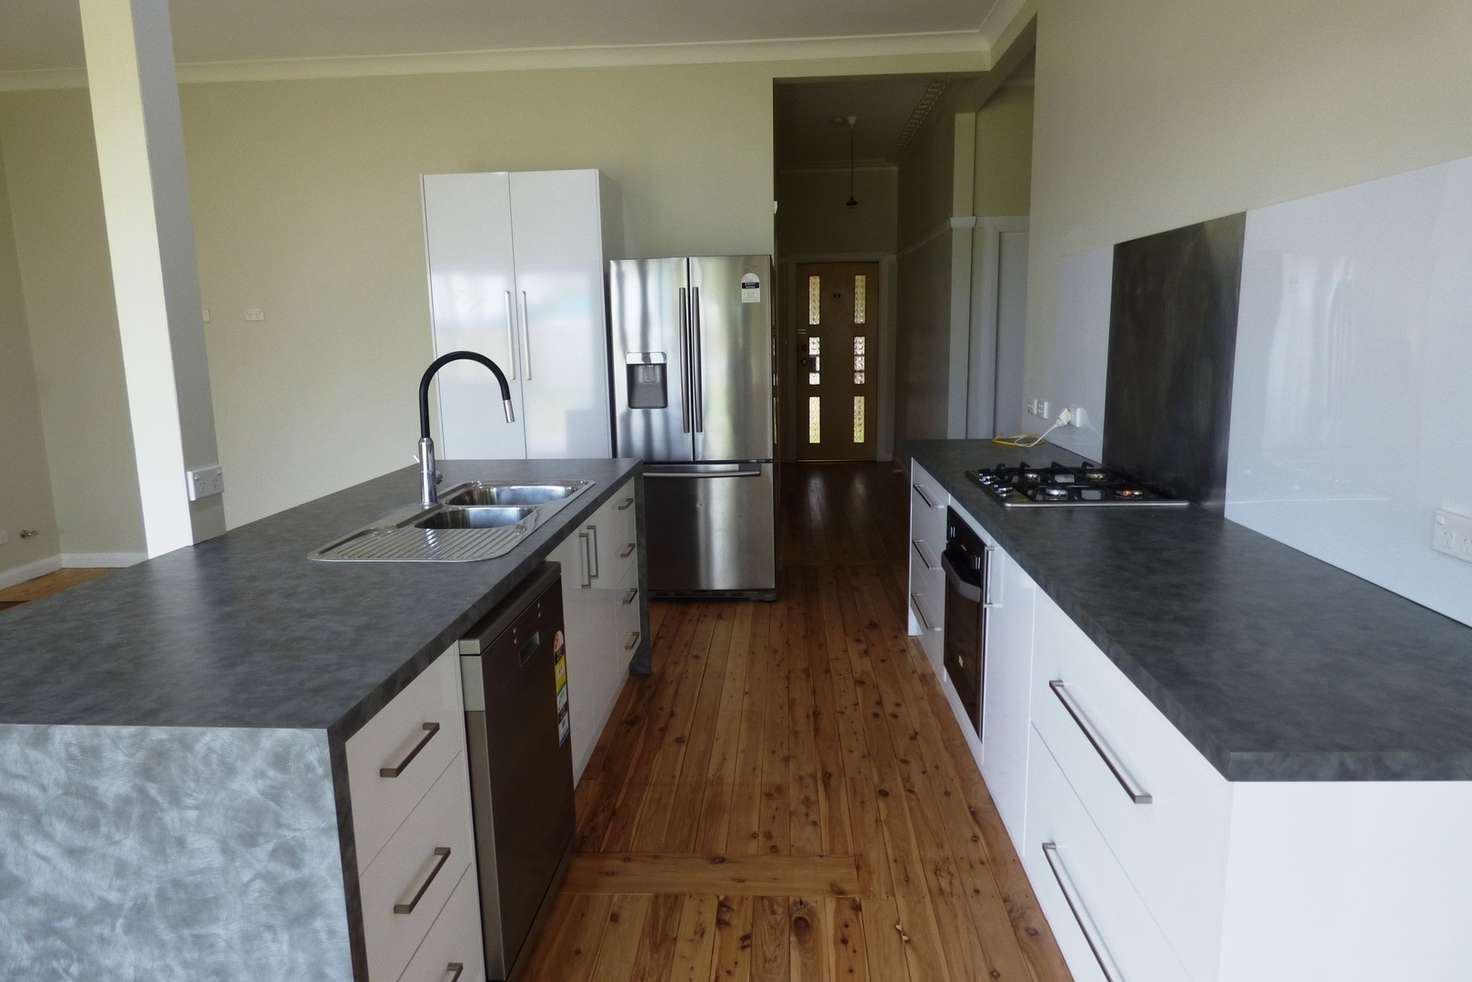 Main view of Homely house listing, 1 Palmer Street, Dubbo NSW 2830